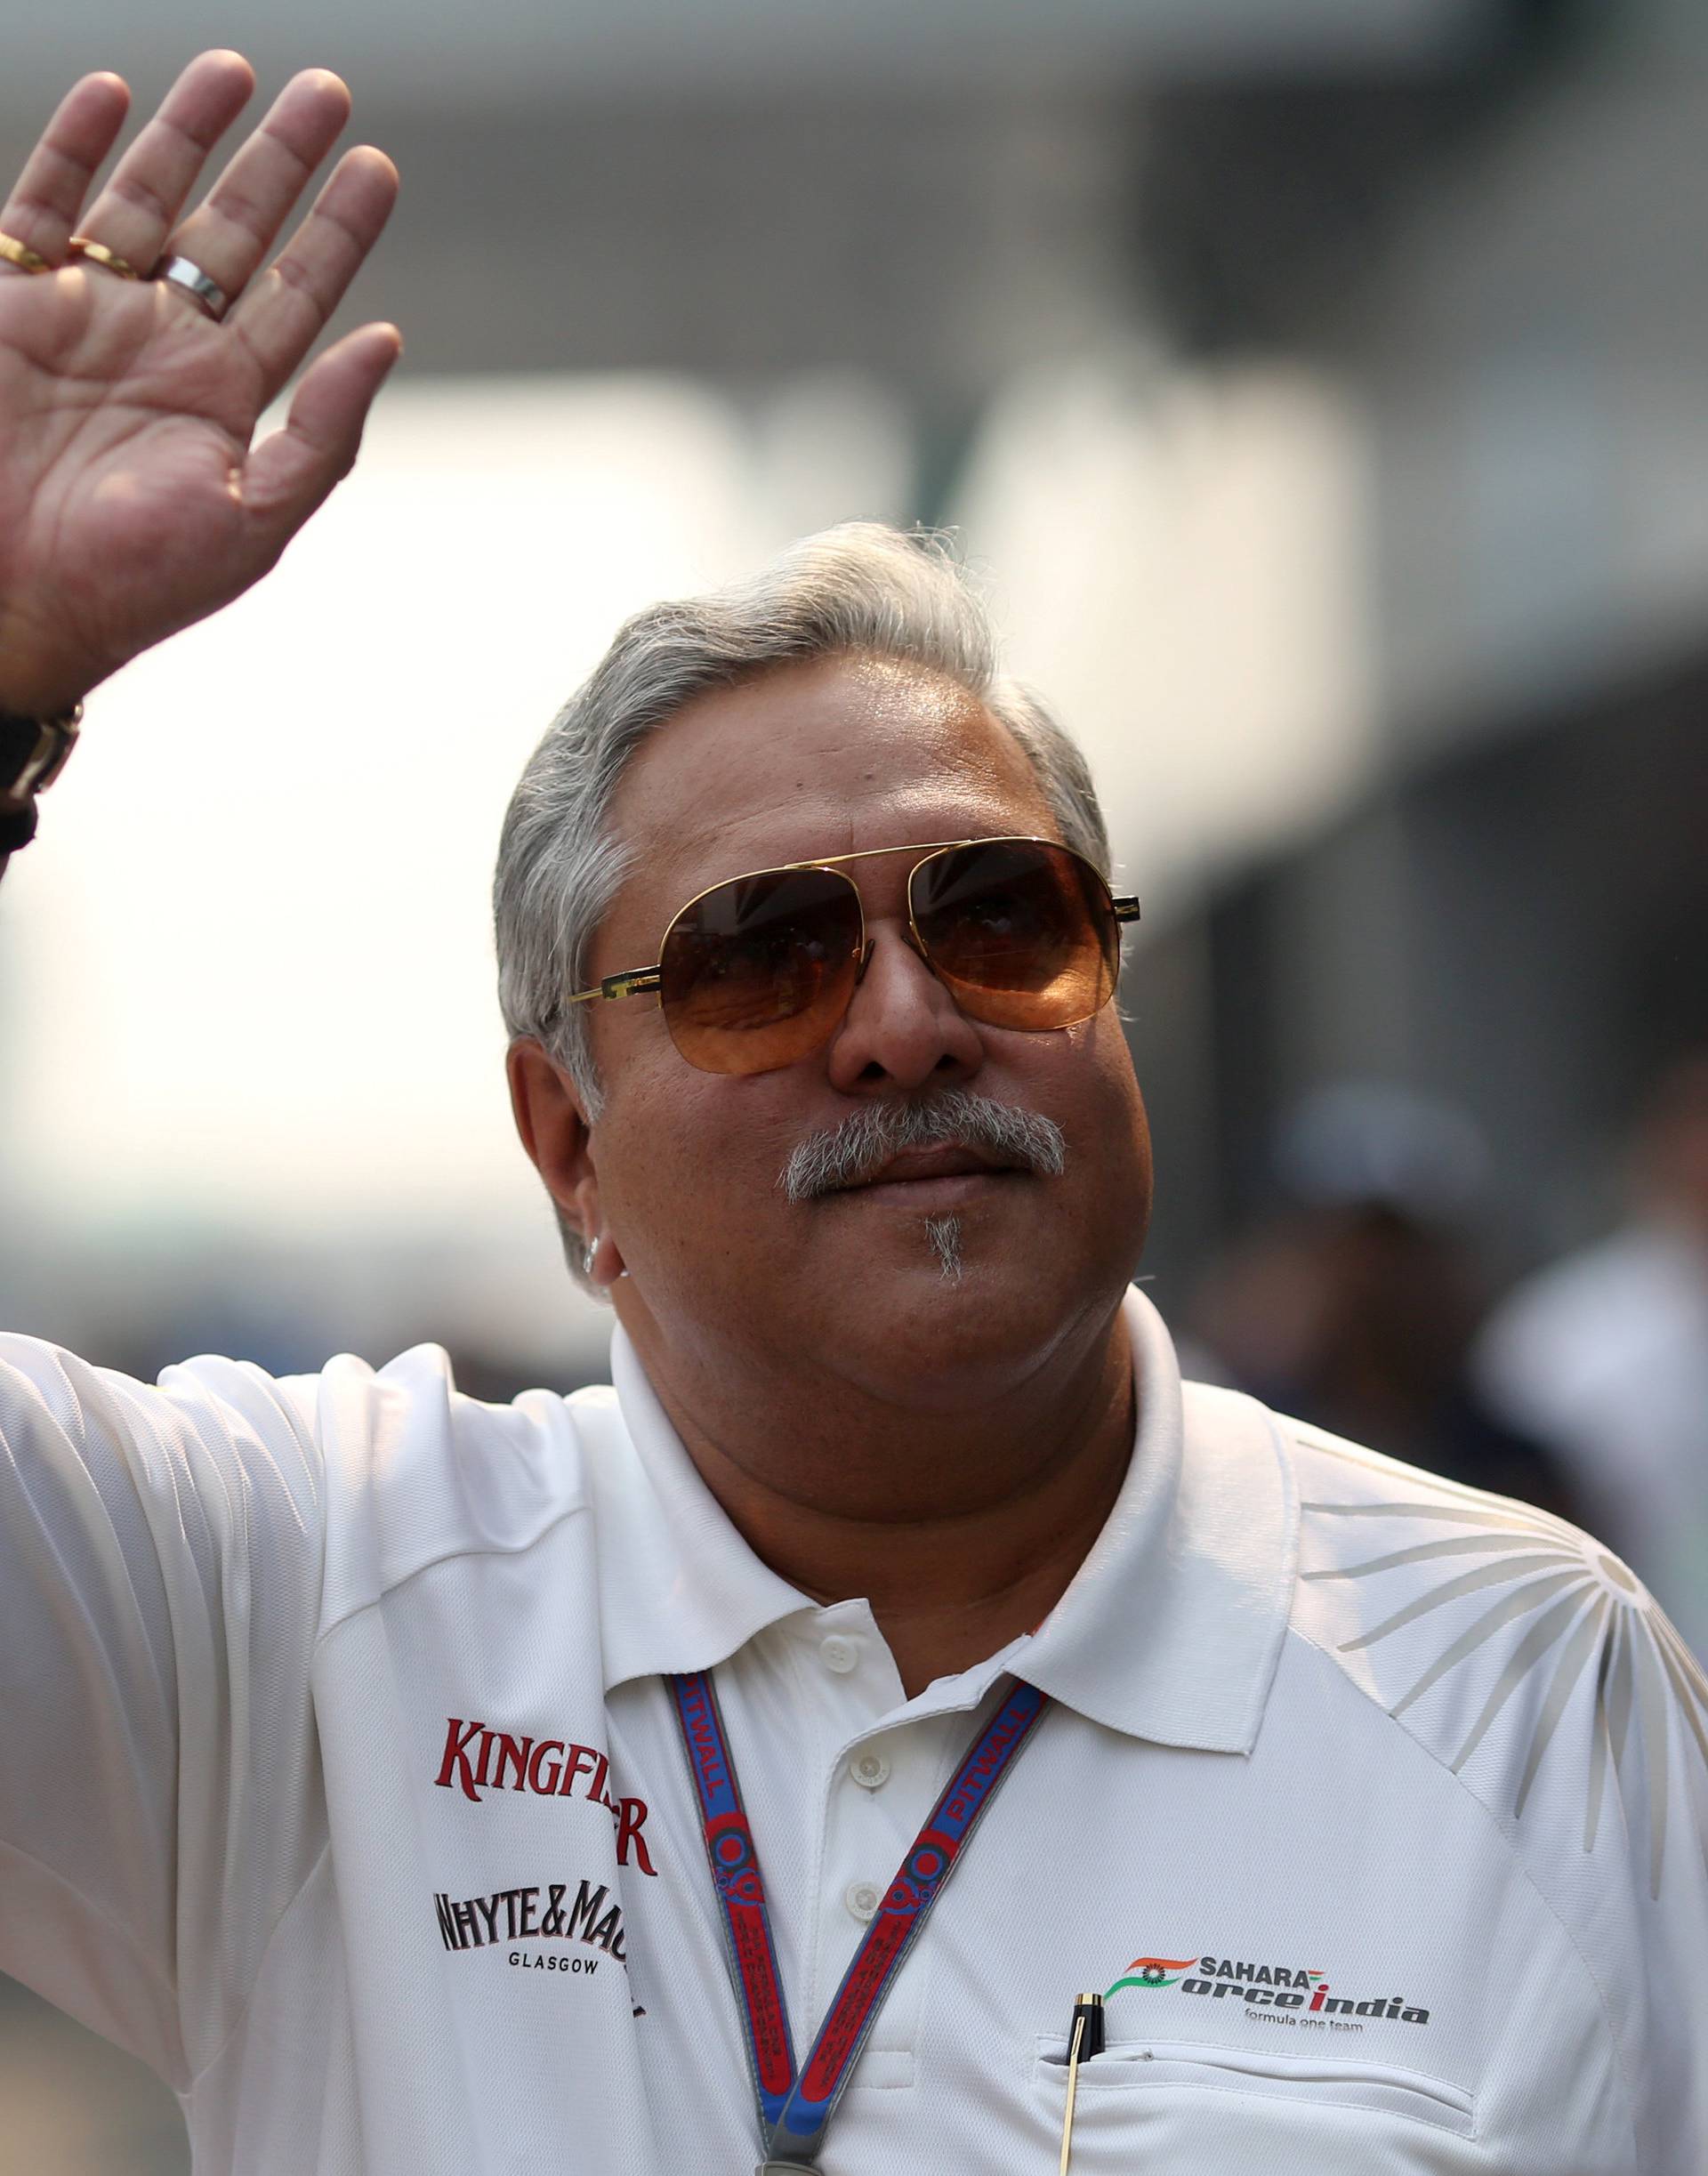 FILE PHOTO: Force India team principal Vijay Mallya waves in the paddock during the third practice session of the Indian F1 Grand Prix at the Buddh International Circuit in Greater Noida